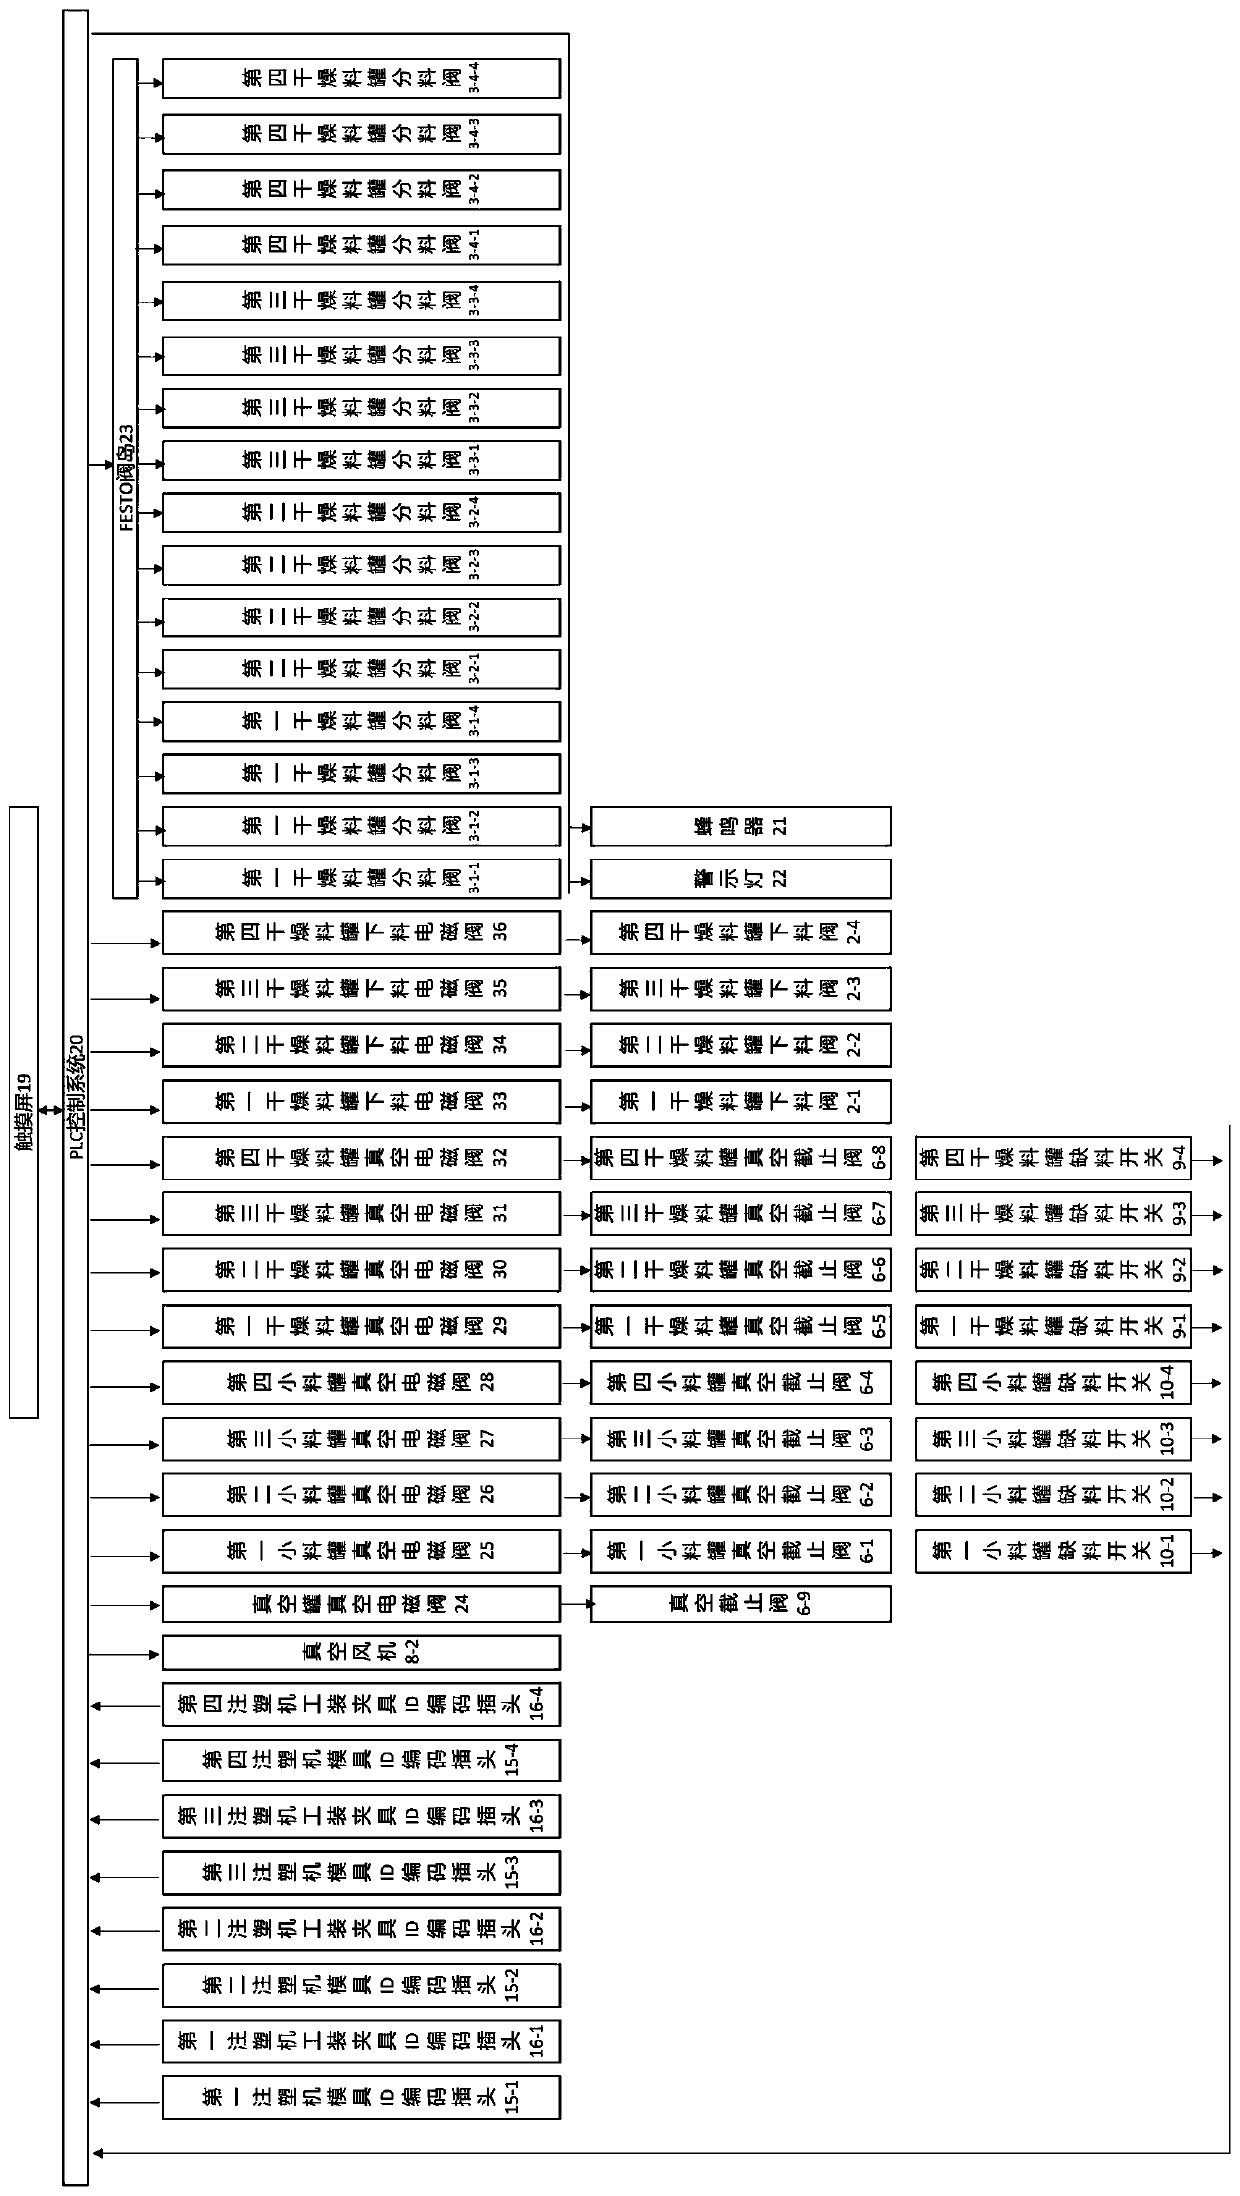 Automatic selection feeding system of injection molding machine for automotive interior trim parts and control system thereof